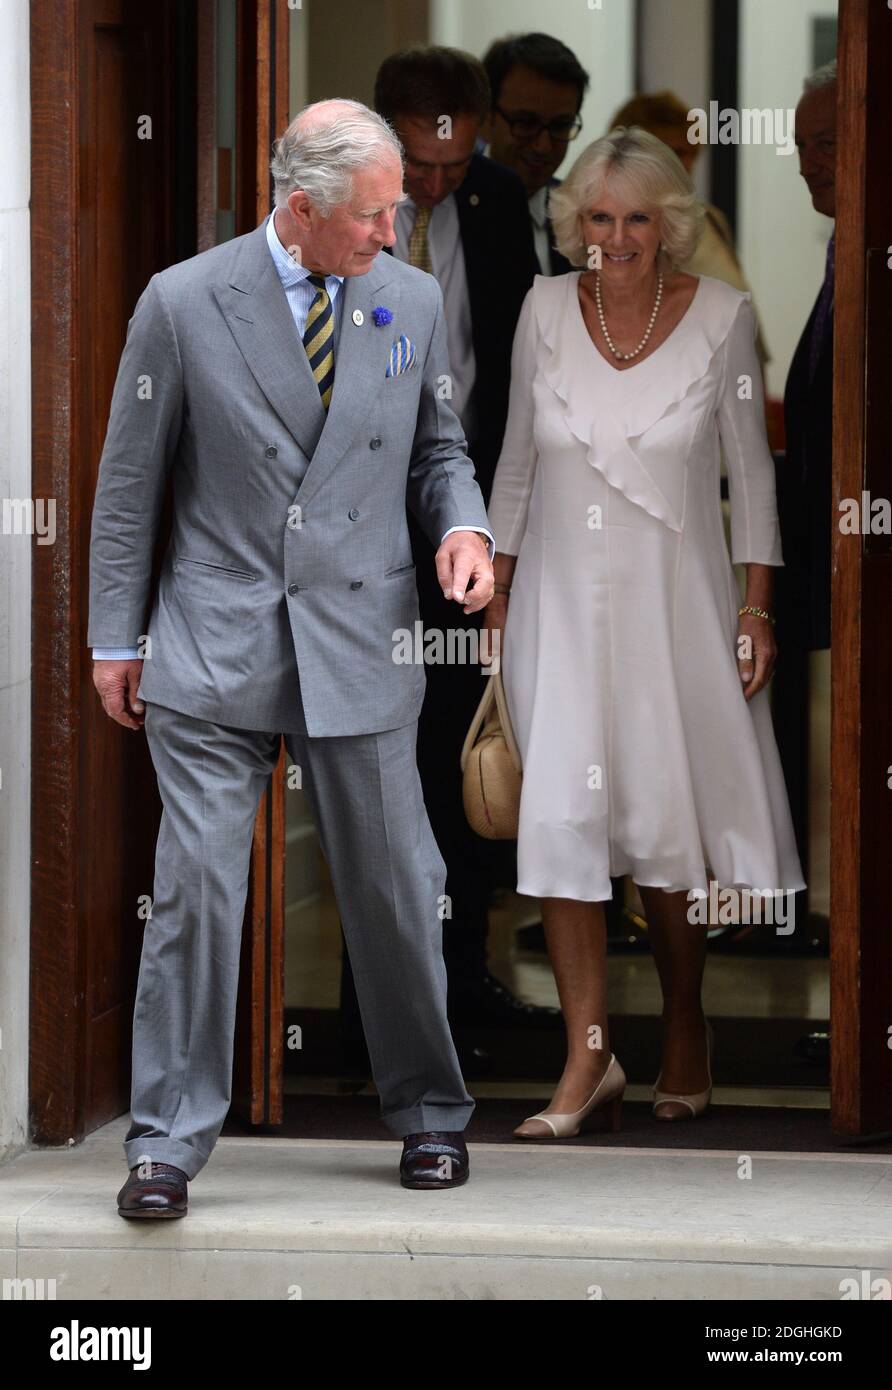 Prince Charles, The Duke of Cornwall and Camilla Parker Bowles, The Duchess of Cornwall visiting Prince William and Kate Middleton, The Duke and Duchess of Cambridge at the Lindo Wing of St Mary's Hospital with their new born baby boy, Paddington, London.   Stock Photo